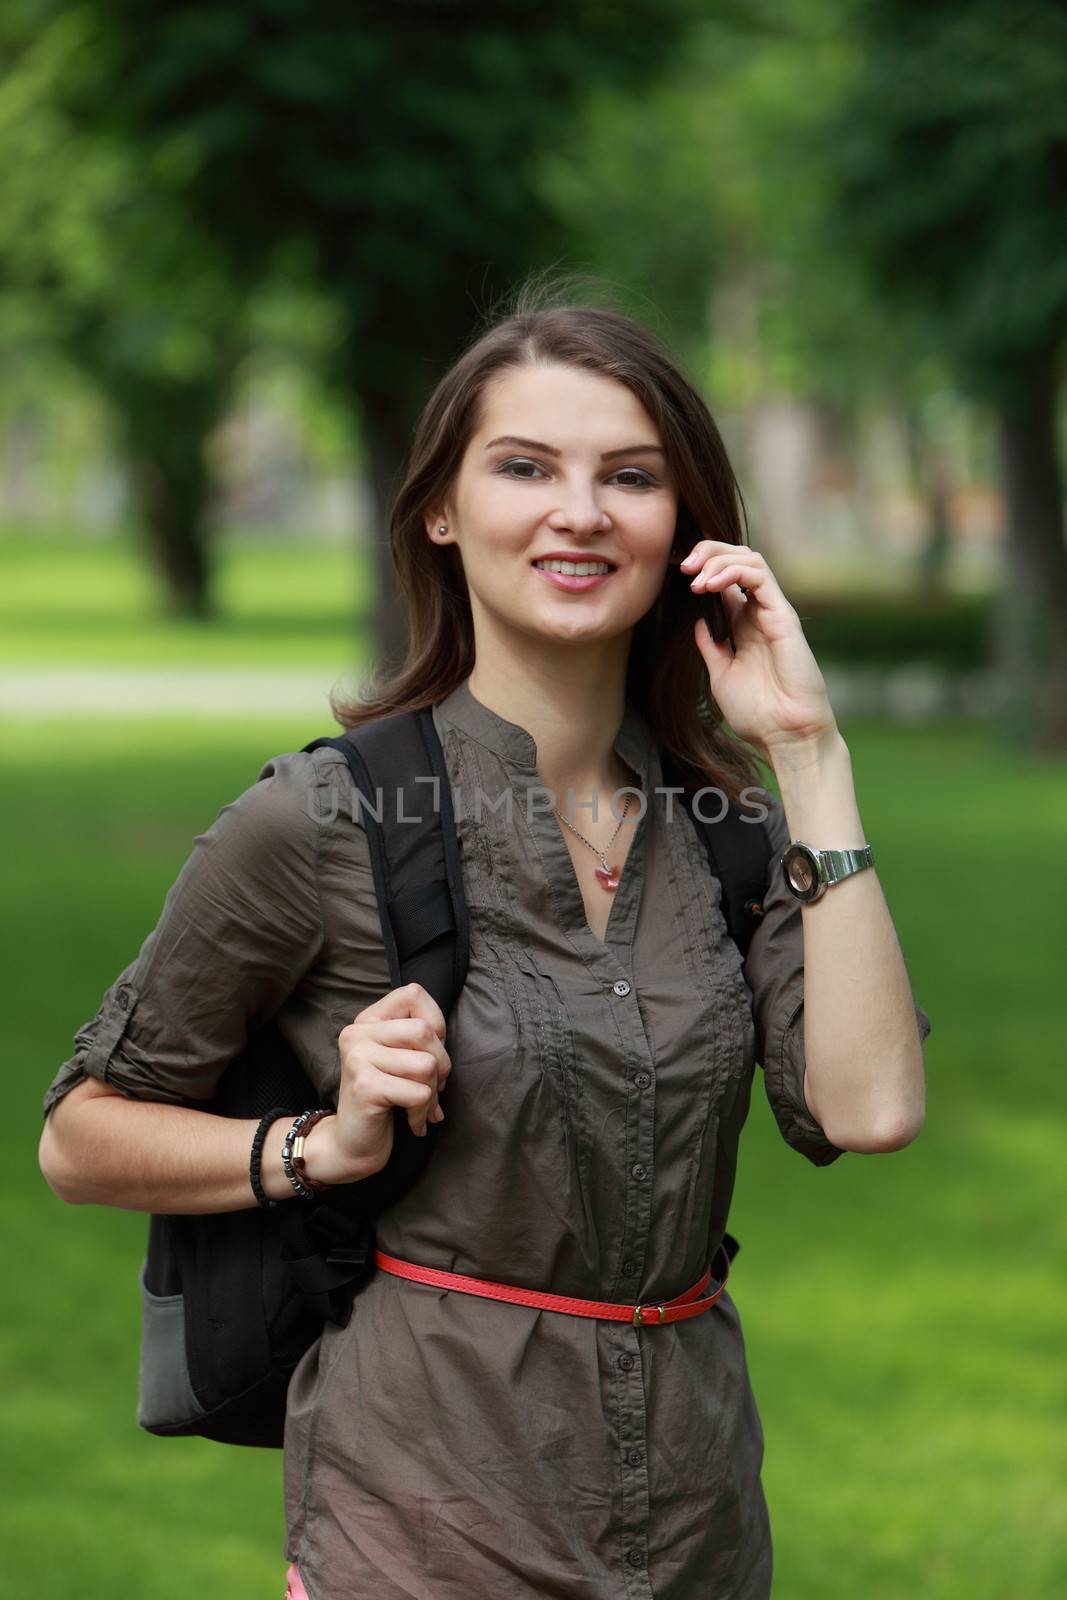 Young woman with backpack using a mobile phone in a park.